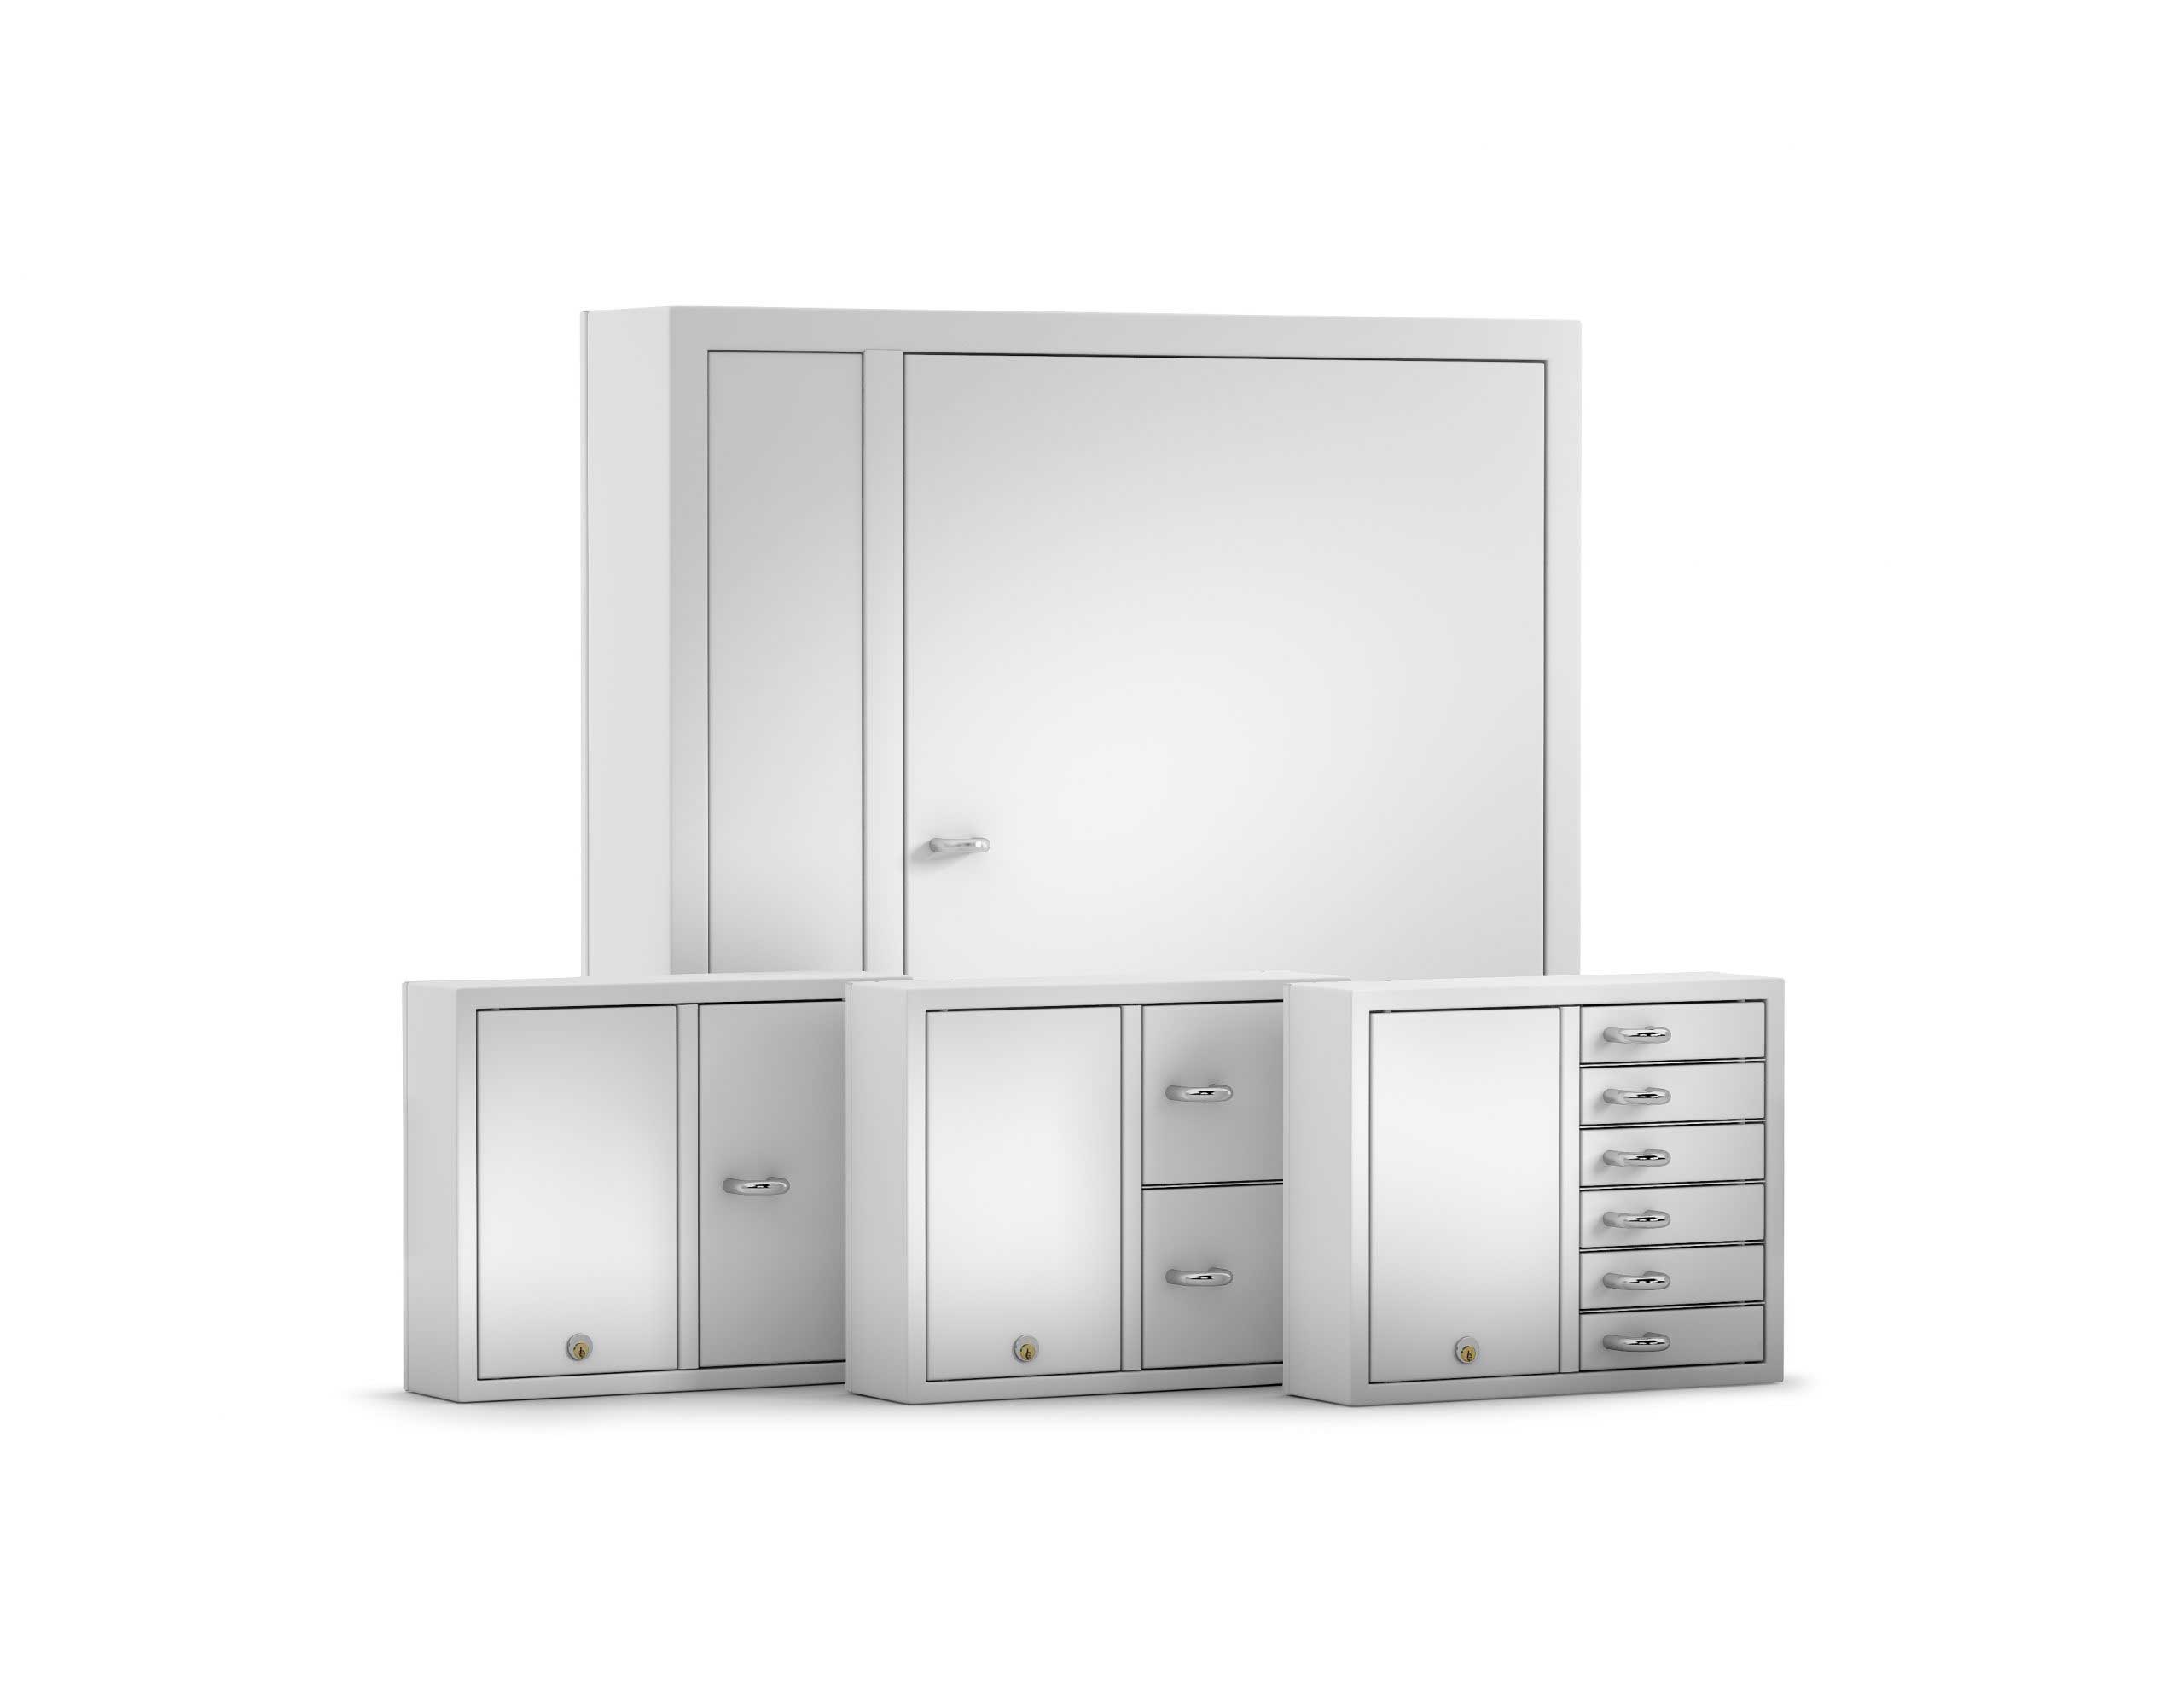 All the Expansion series distribution cabinets are designed for key management